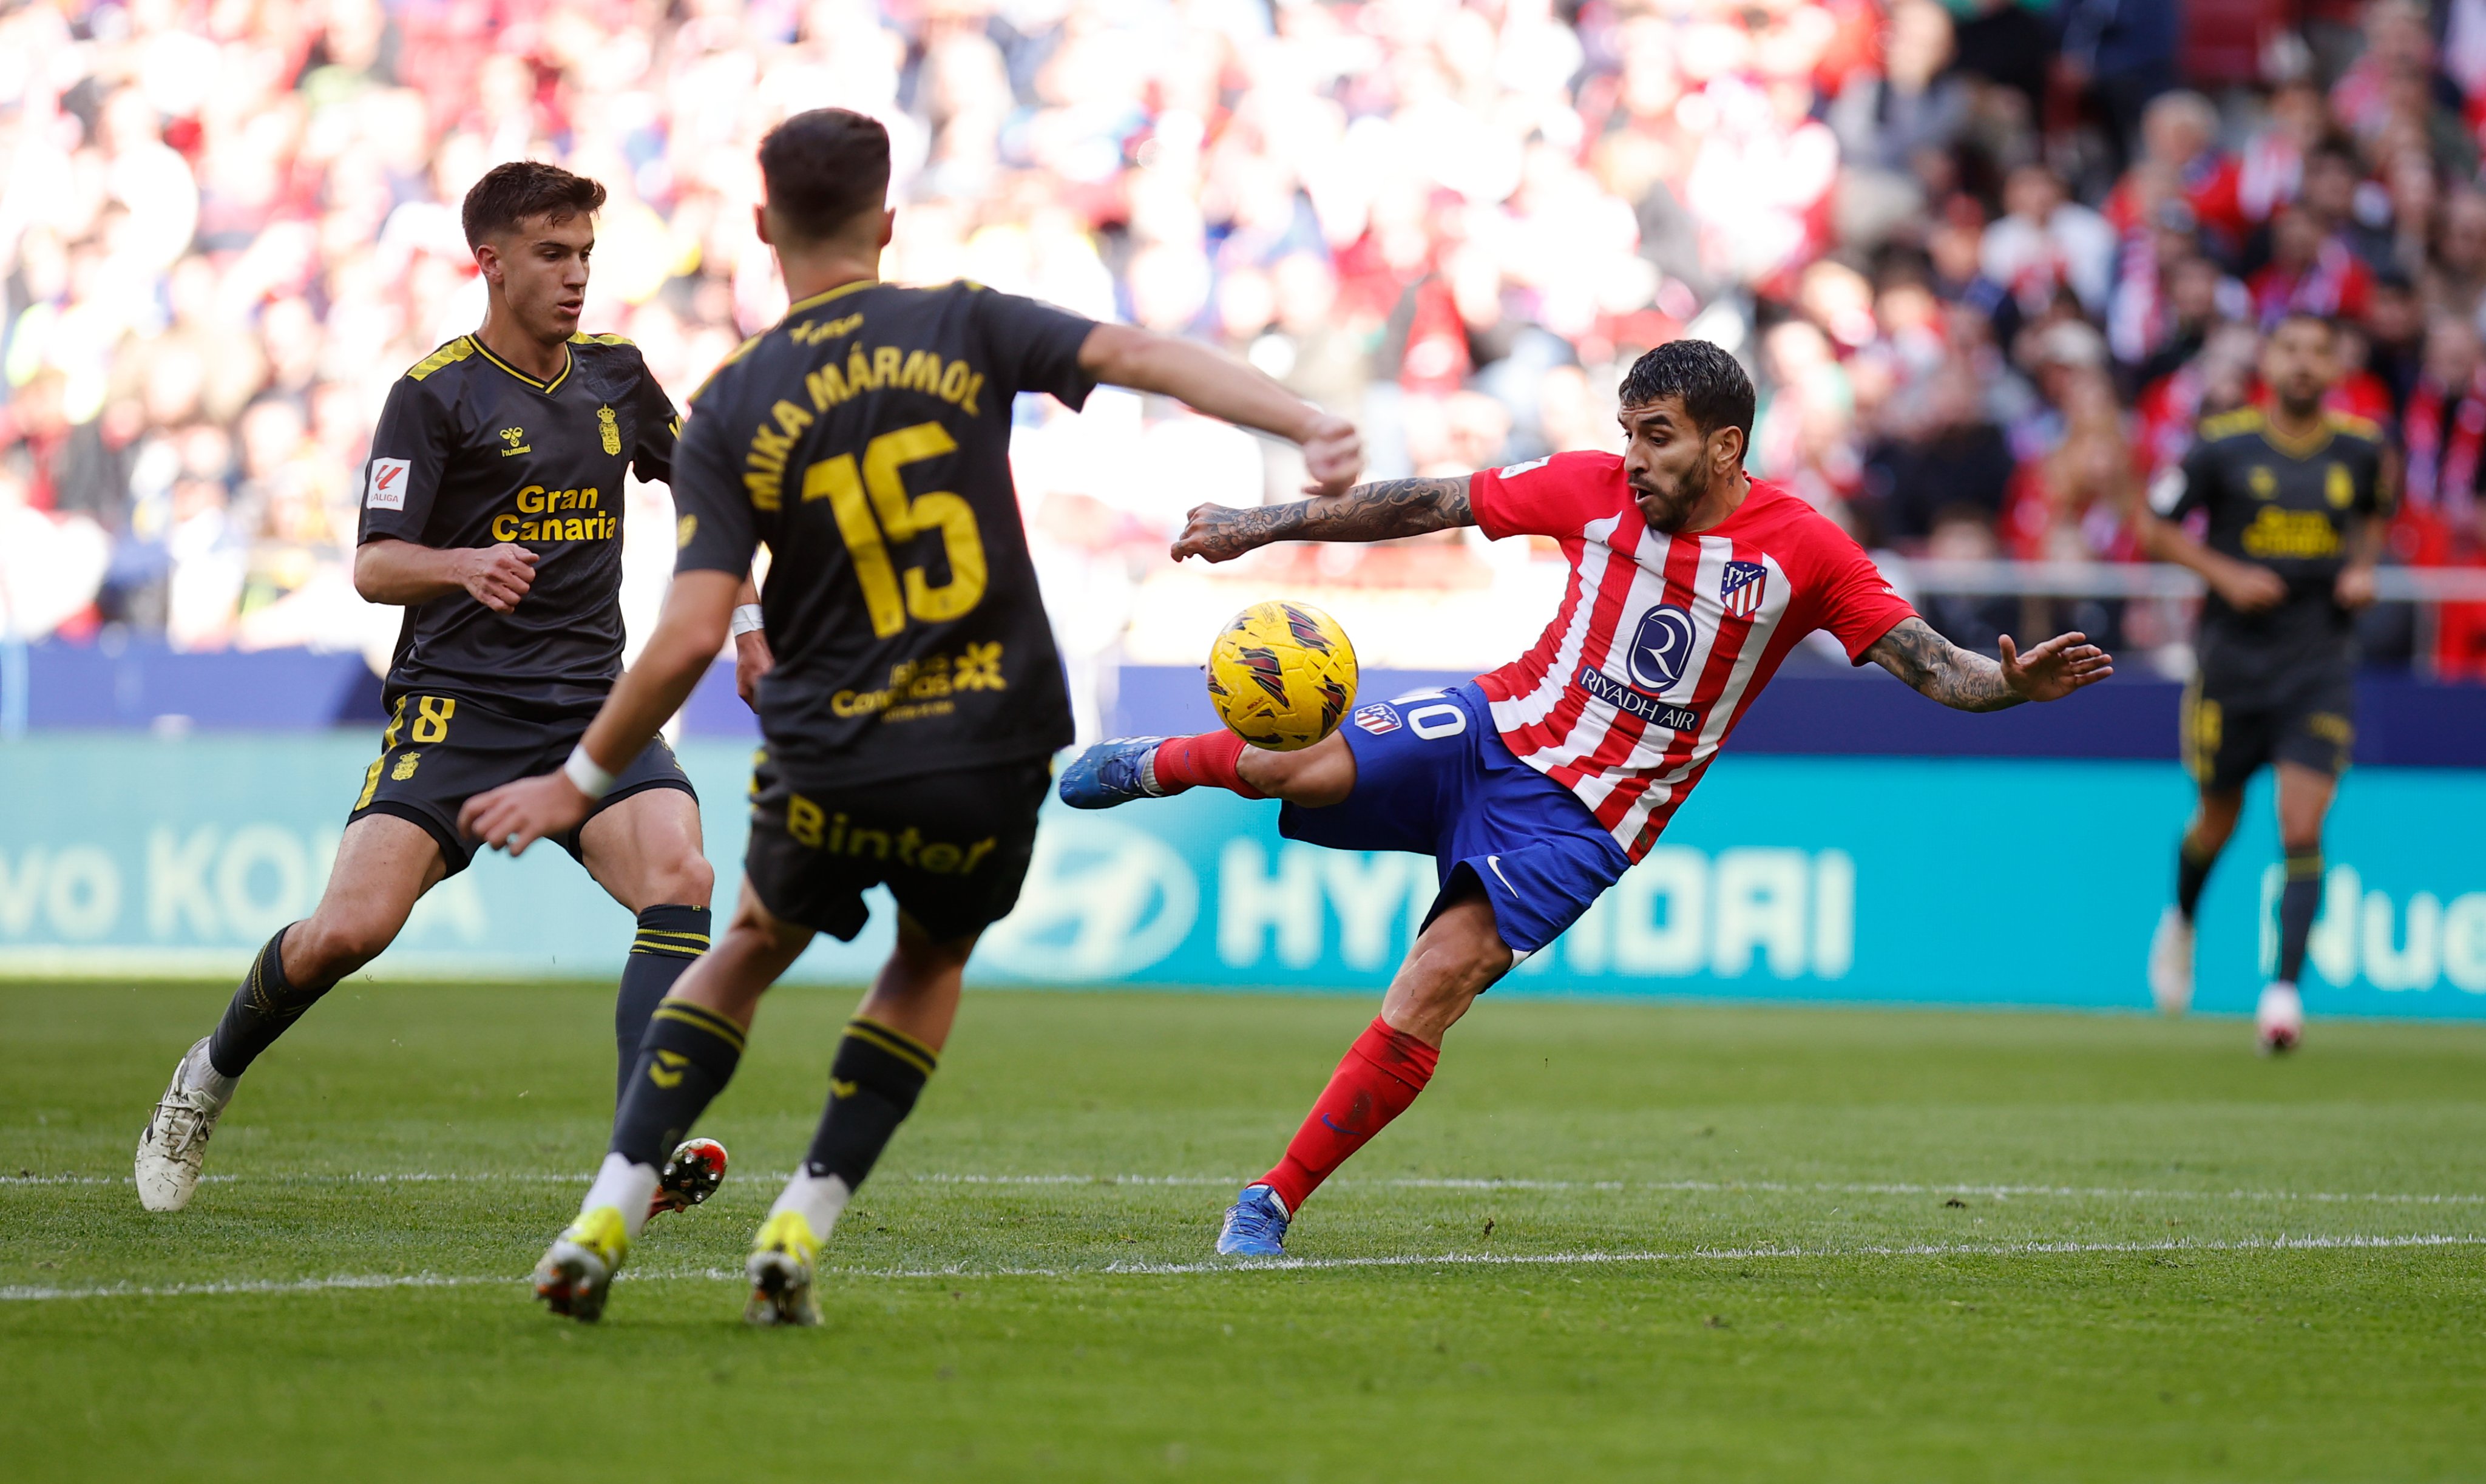 Atletico Madrid prepared to sell 29-year-old this summer, €25m asking price established